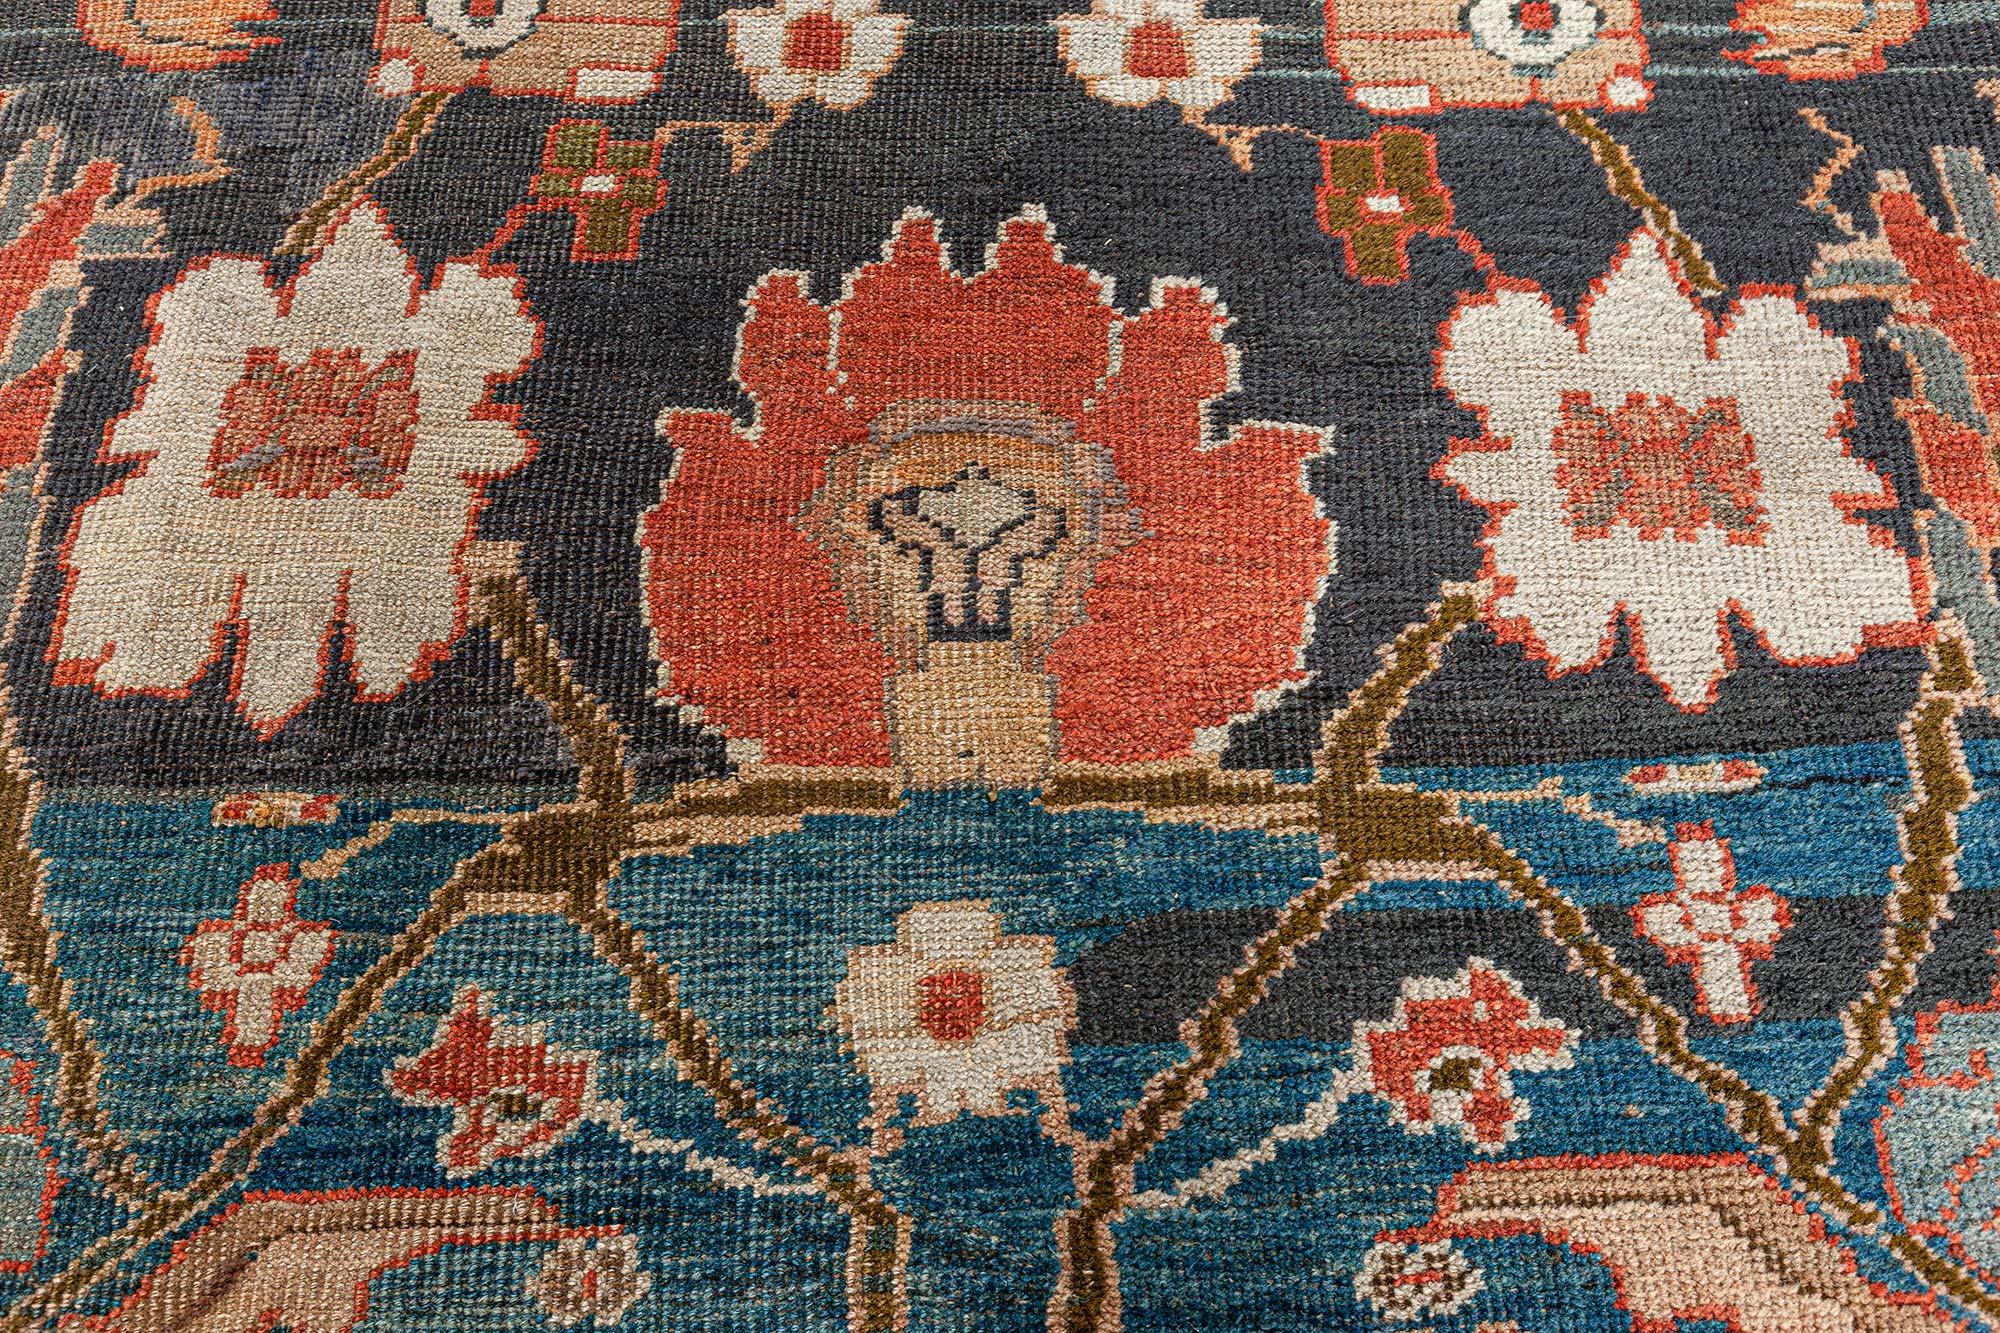 Antique Persian Sultanabad rug
Size: 10'3